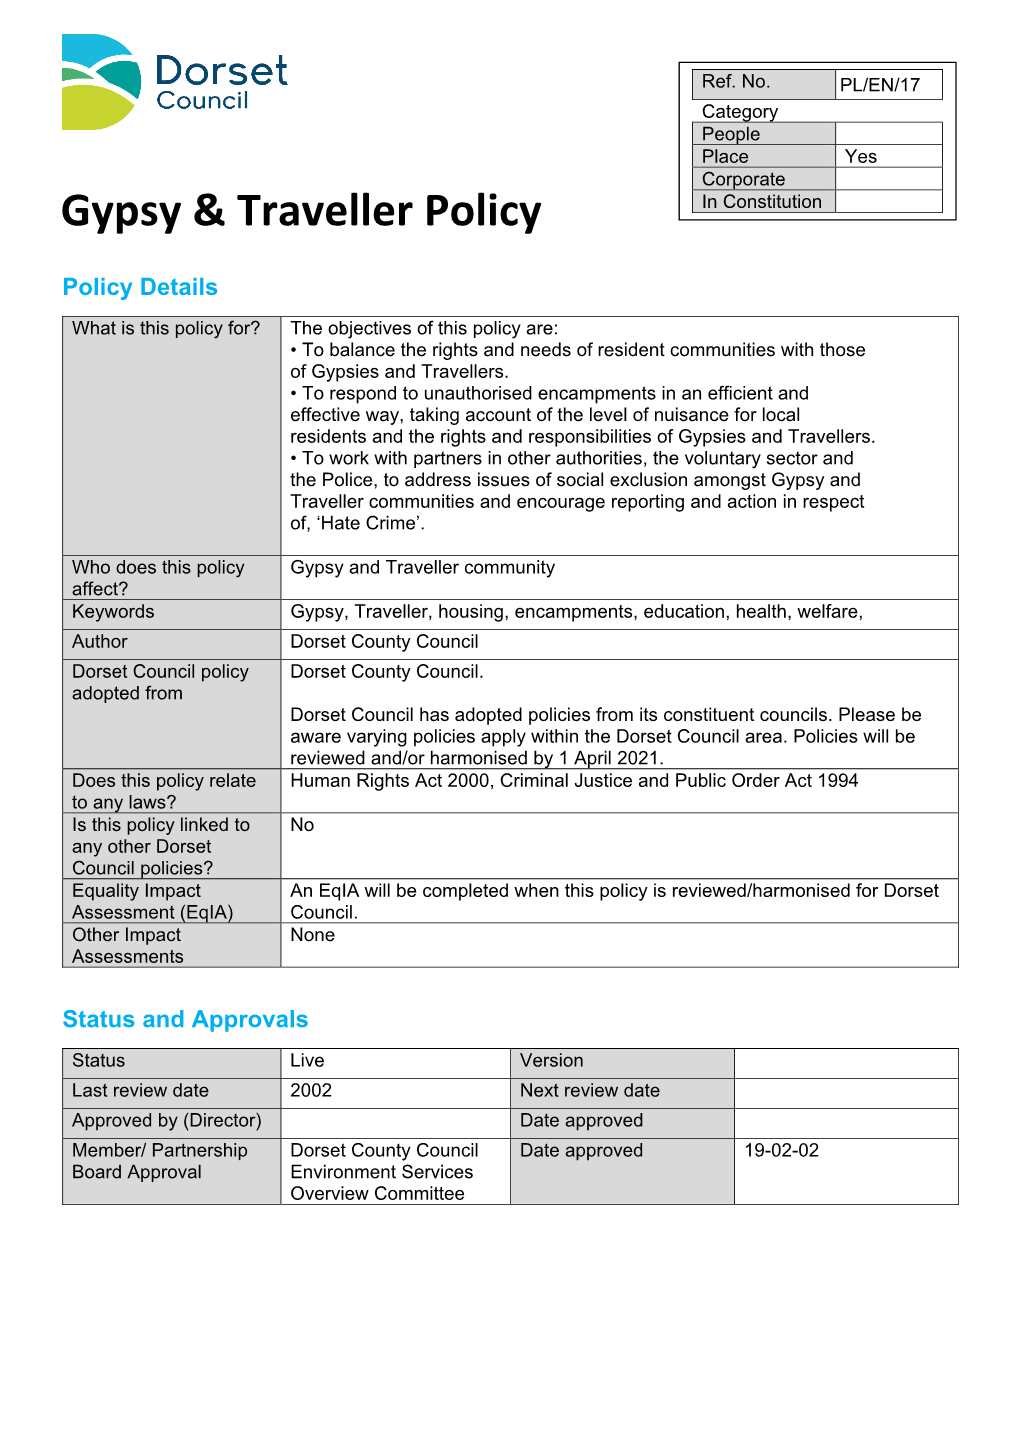 Gypsy & Traveller Policy